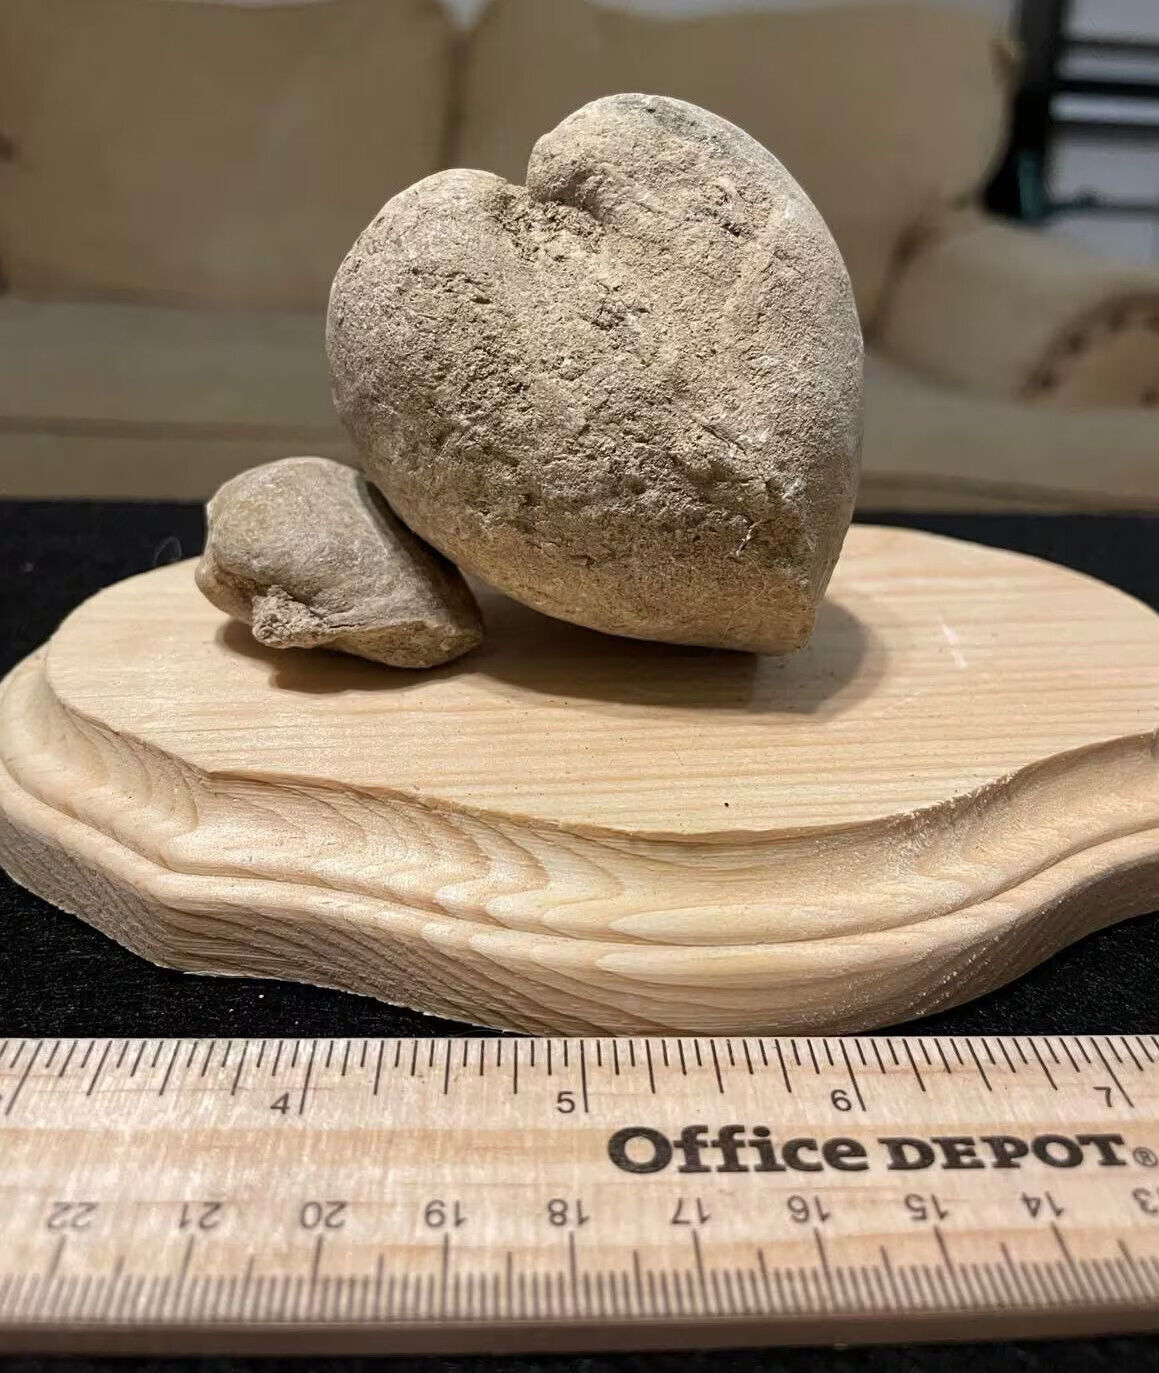 Heart Shaped Giant Clam Fossil - 60 Million Year Old Cretaceous Bivalve